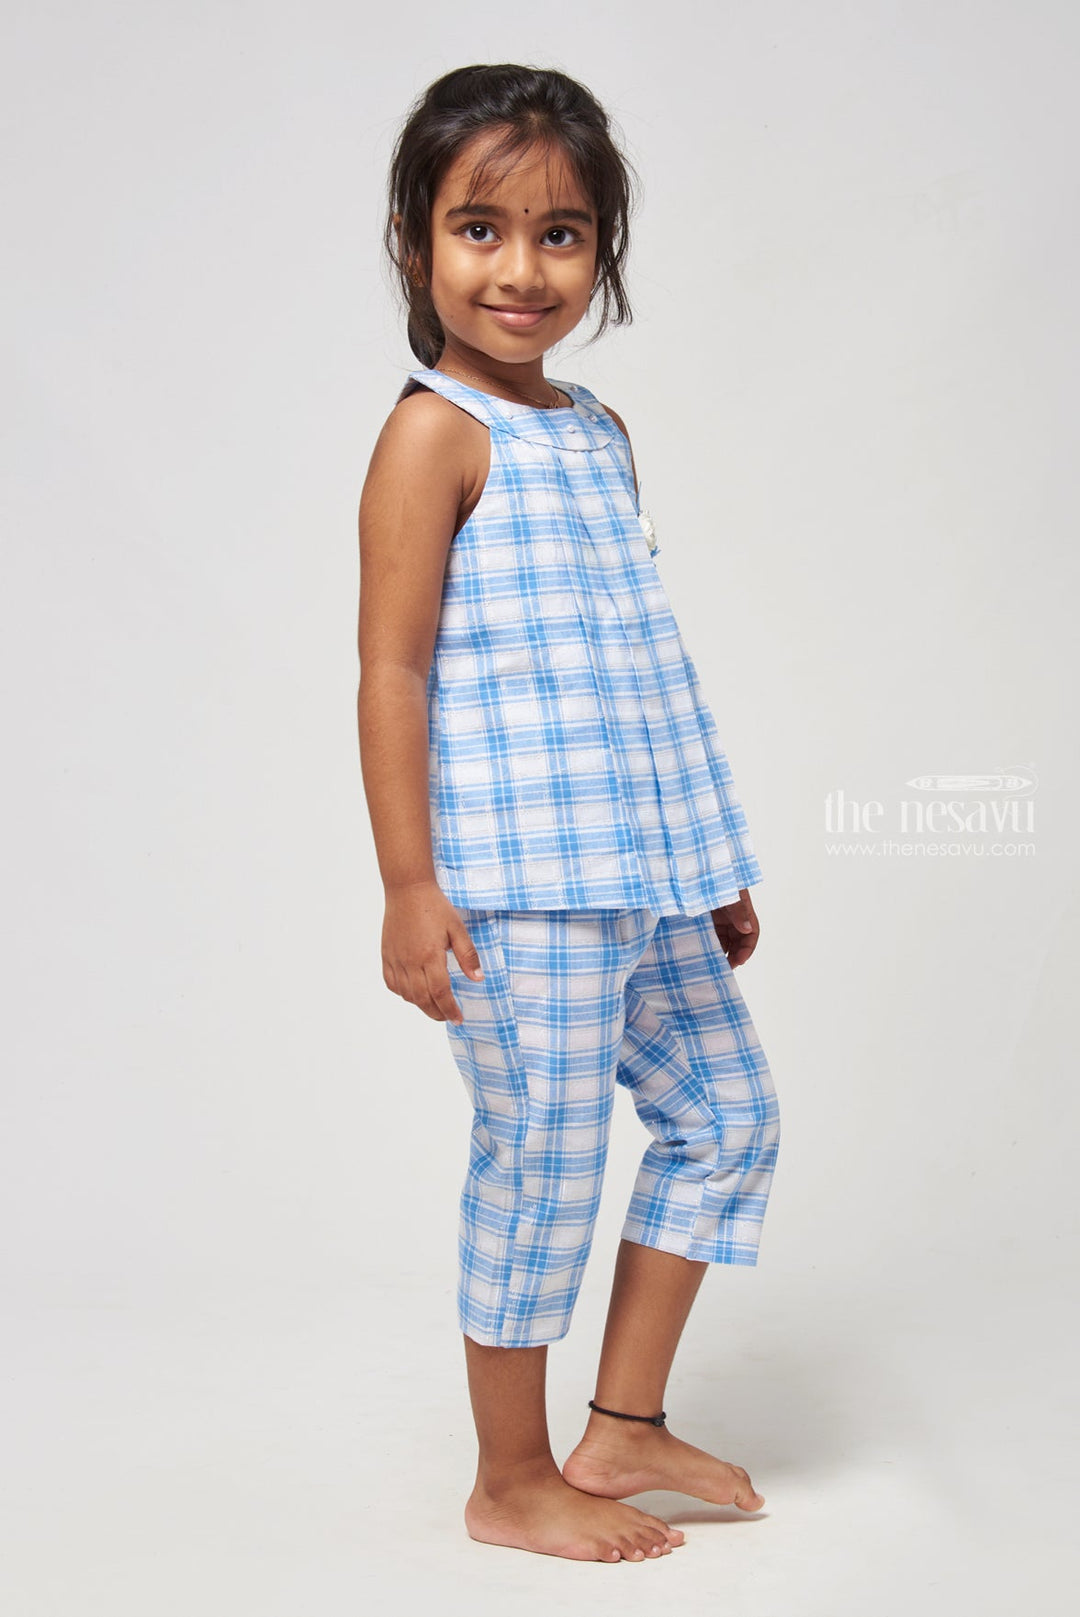 The Nesavu Baby Frock / Jhabla Blue Checkered Halter Top & Pant Set for Young Fashionistas Nesavu Trendy baby frock designs | Baby Frocks Casuals | The Nesavu